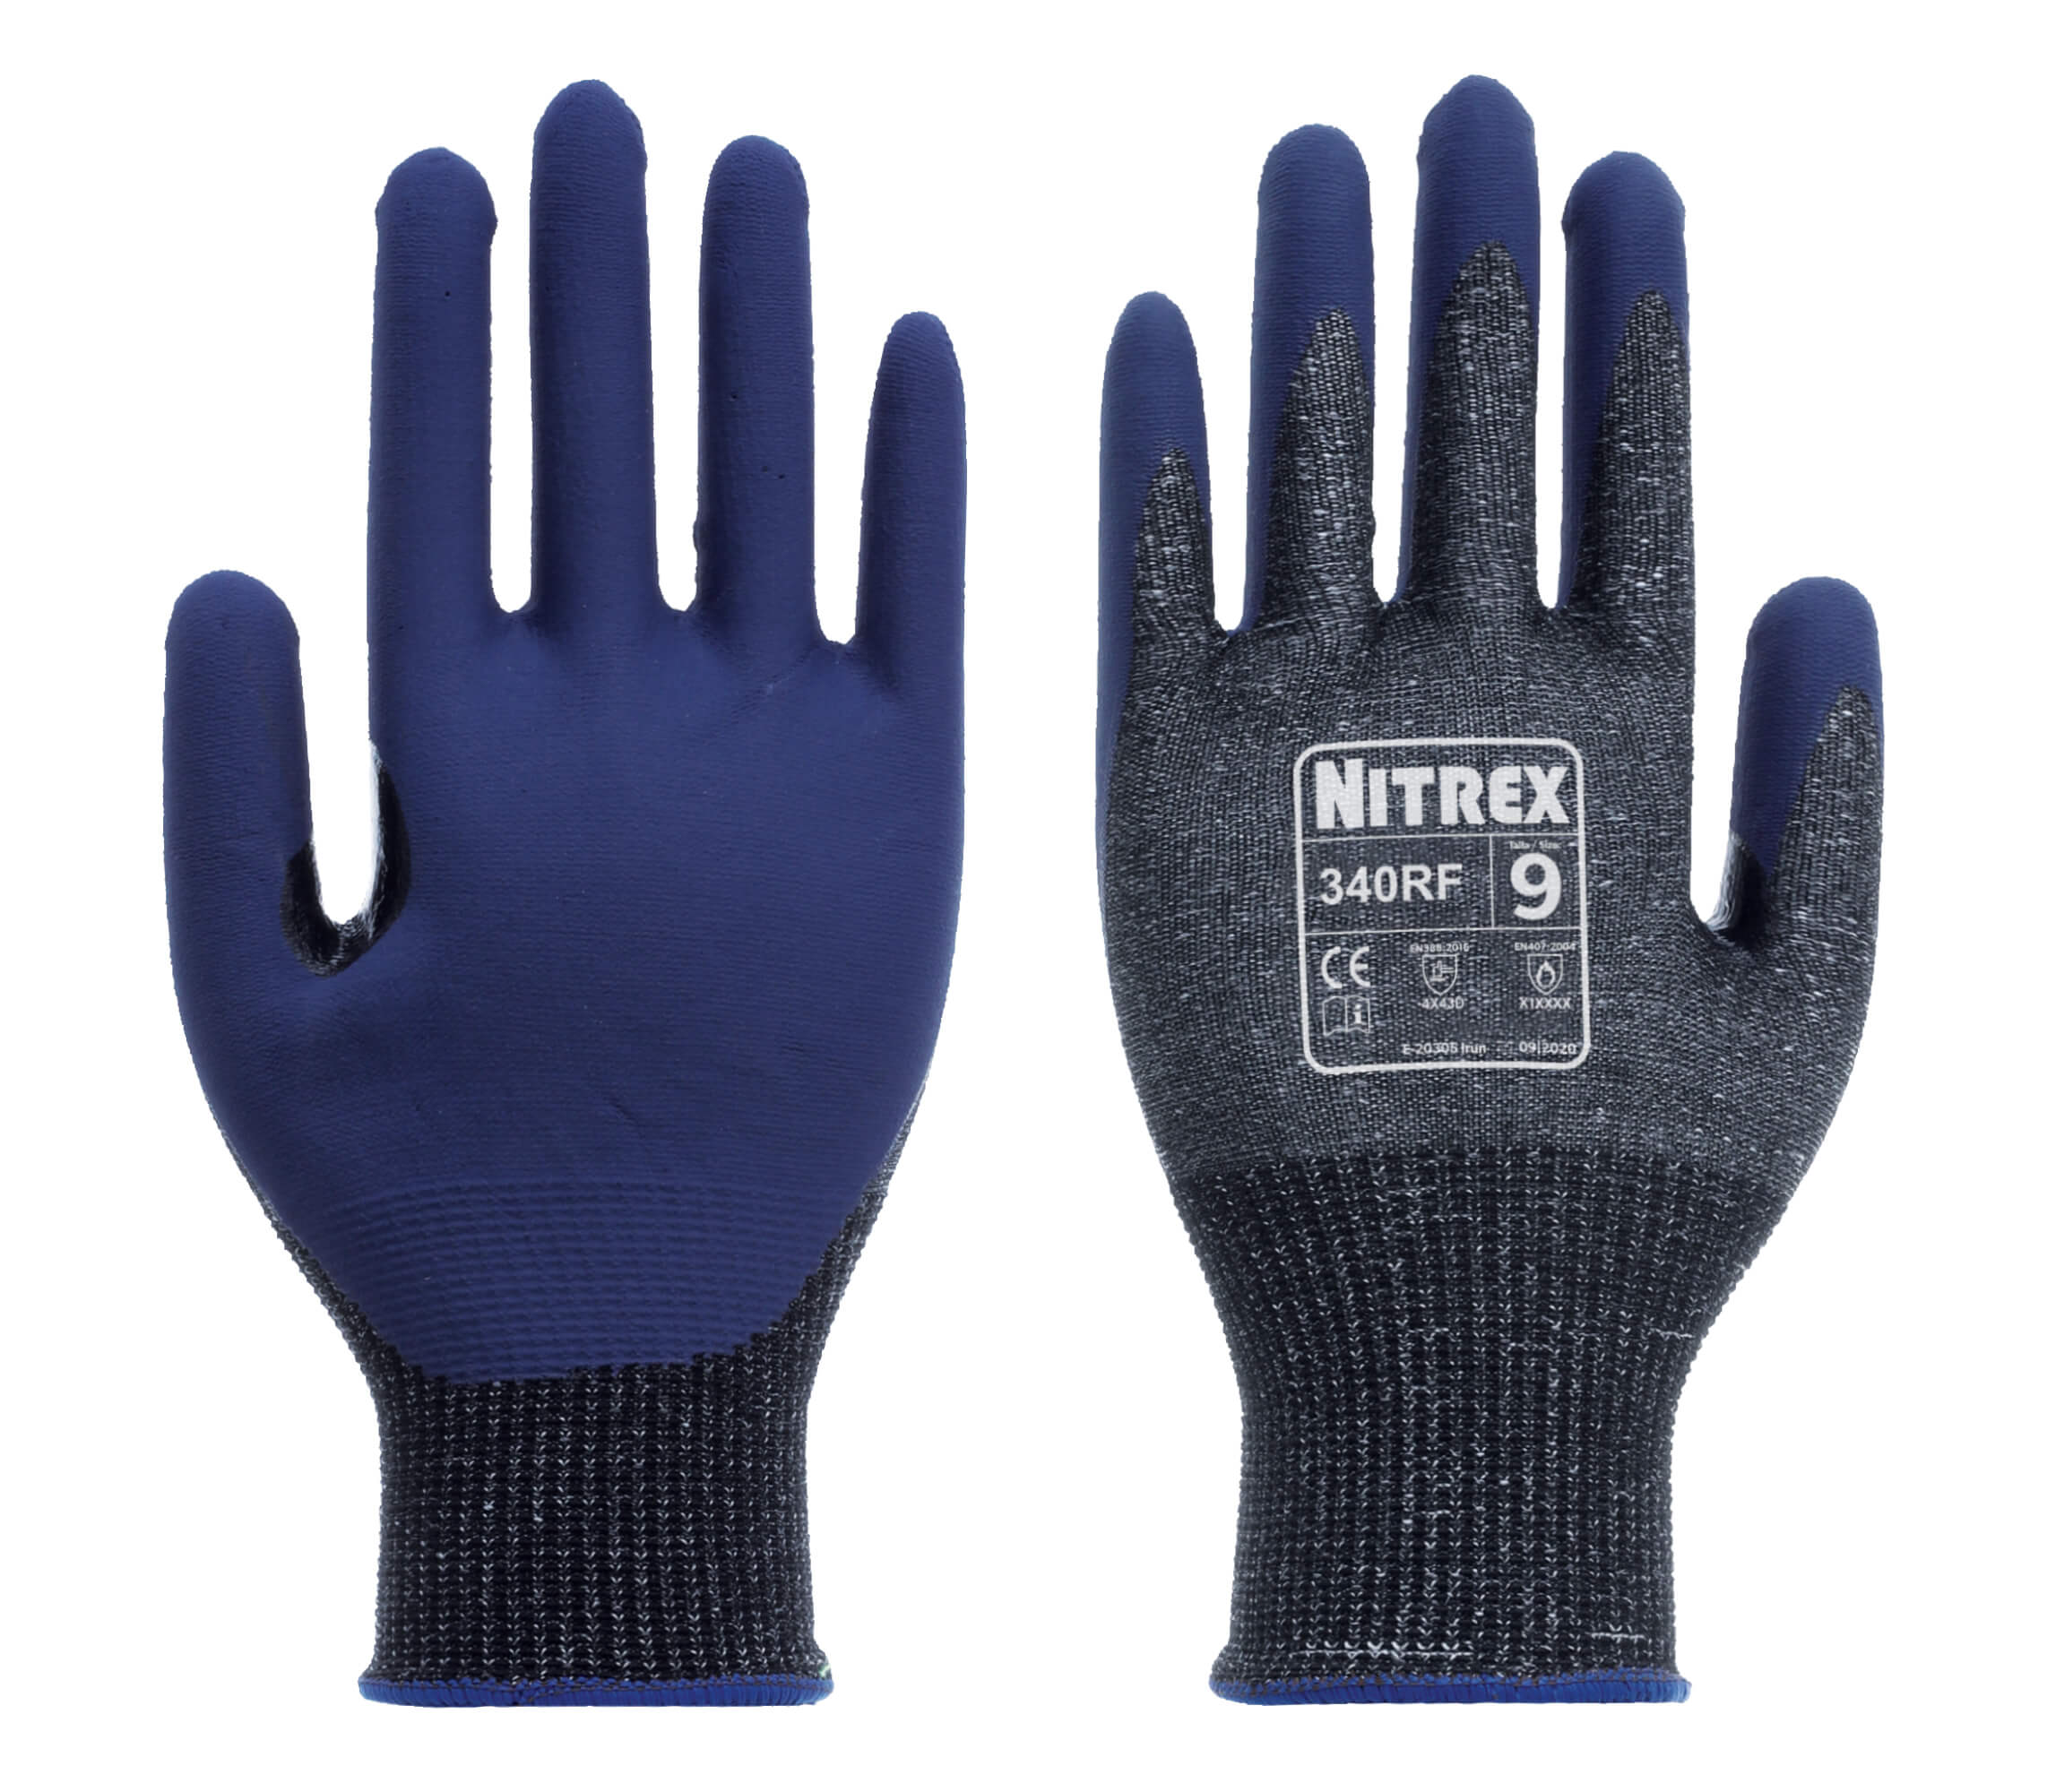 Nitrex 340RF - Foam Nitrile Level D Safety Gloves - Reinforced Thumb Crotch - Size 7/Small